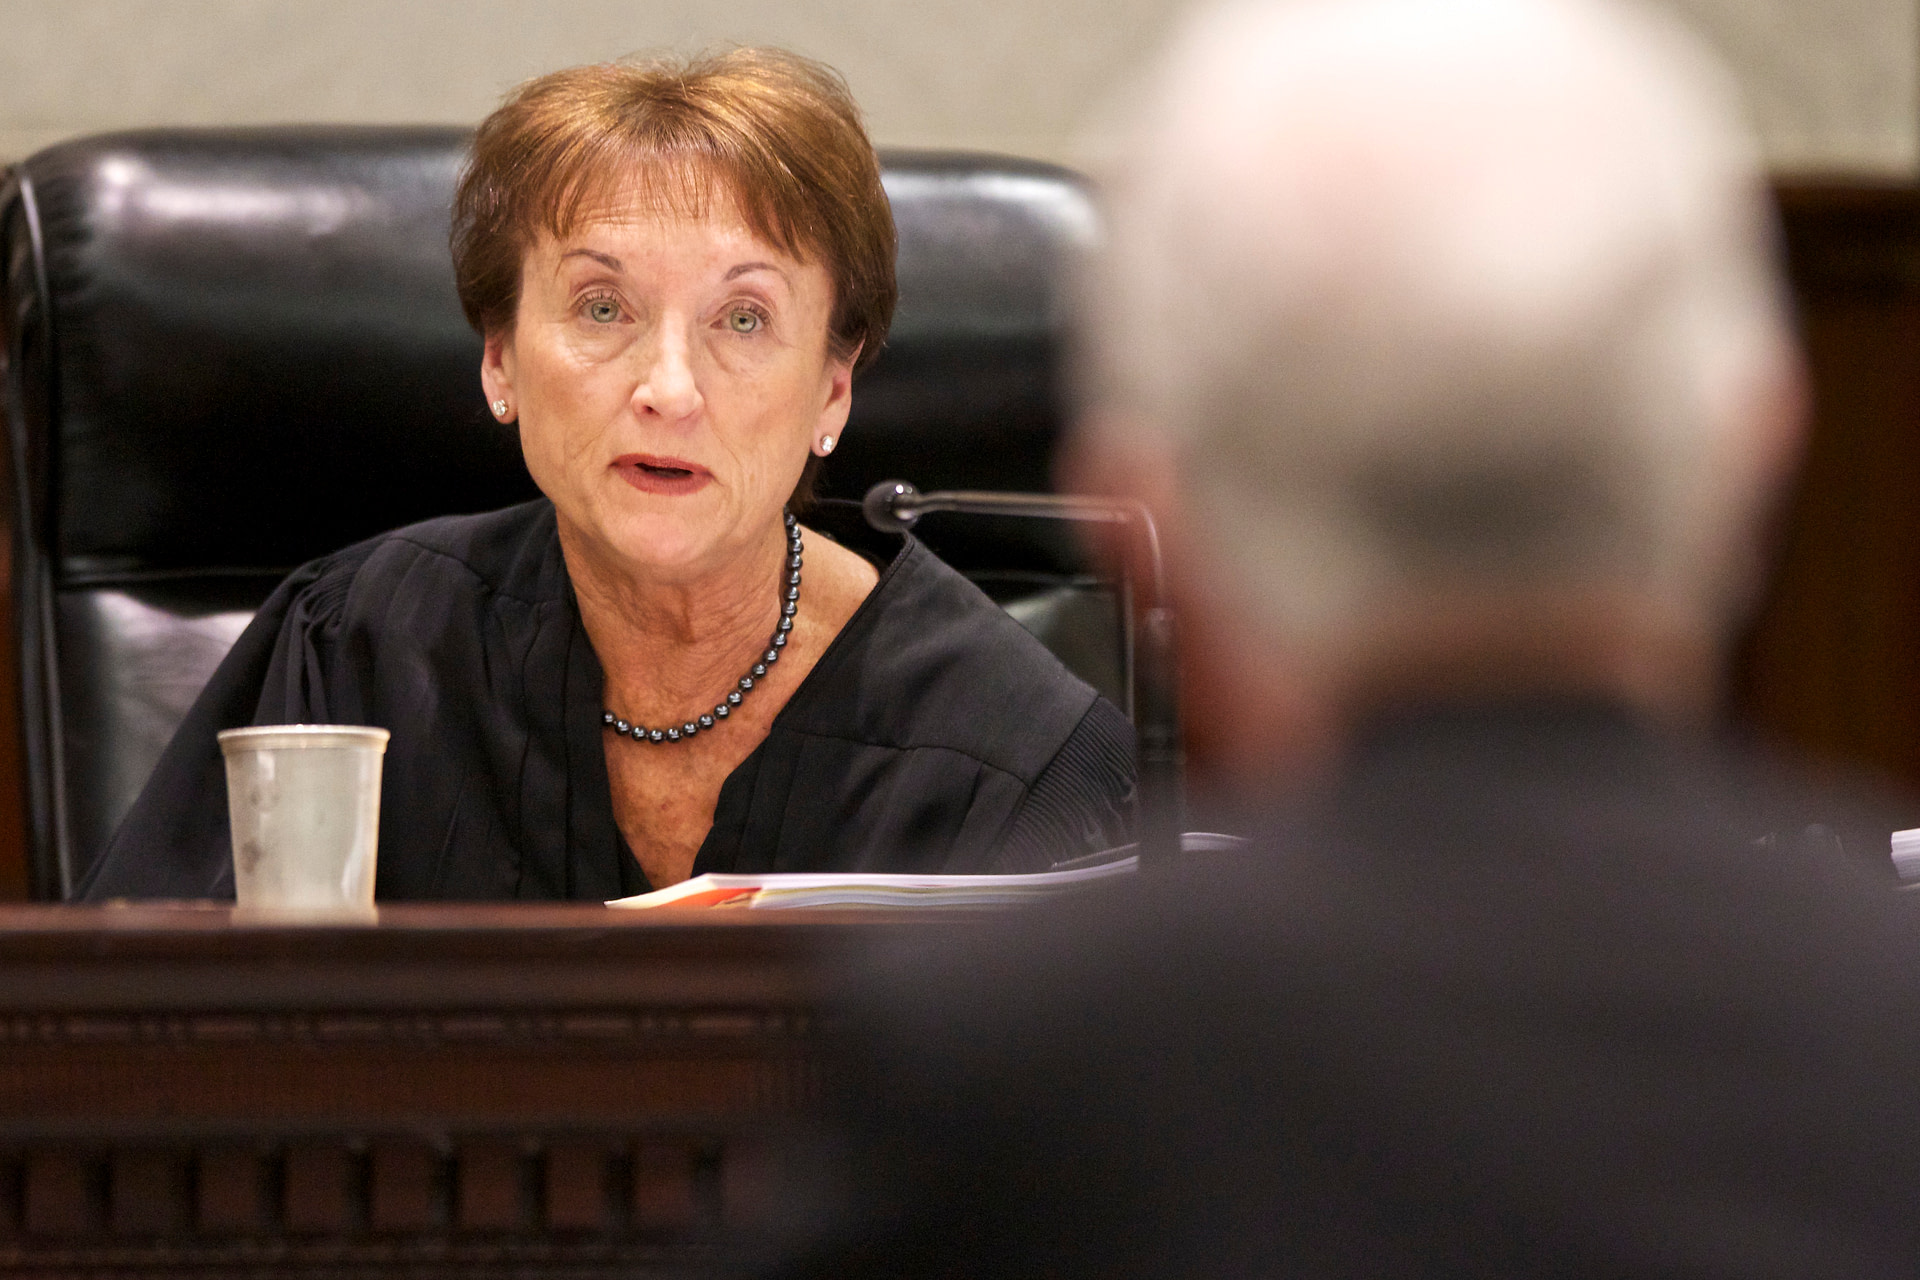 The only woman on South Carolina’s top court is retiring, likely leaving an all-male bench